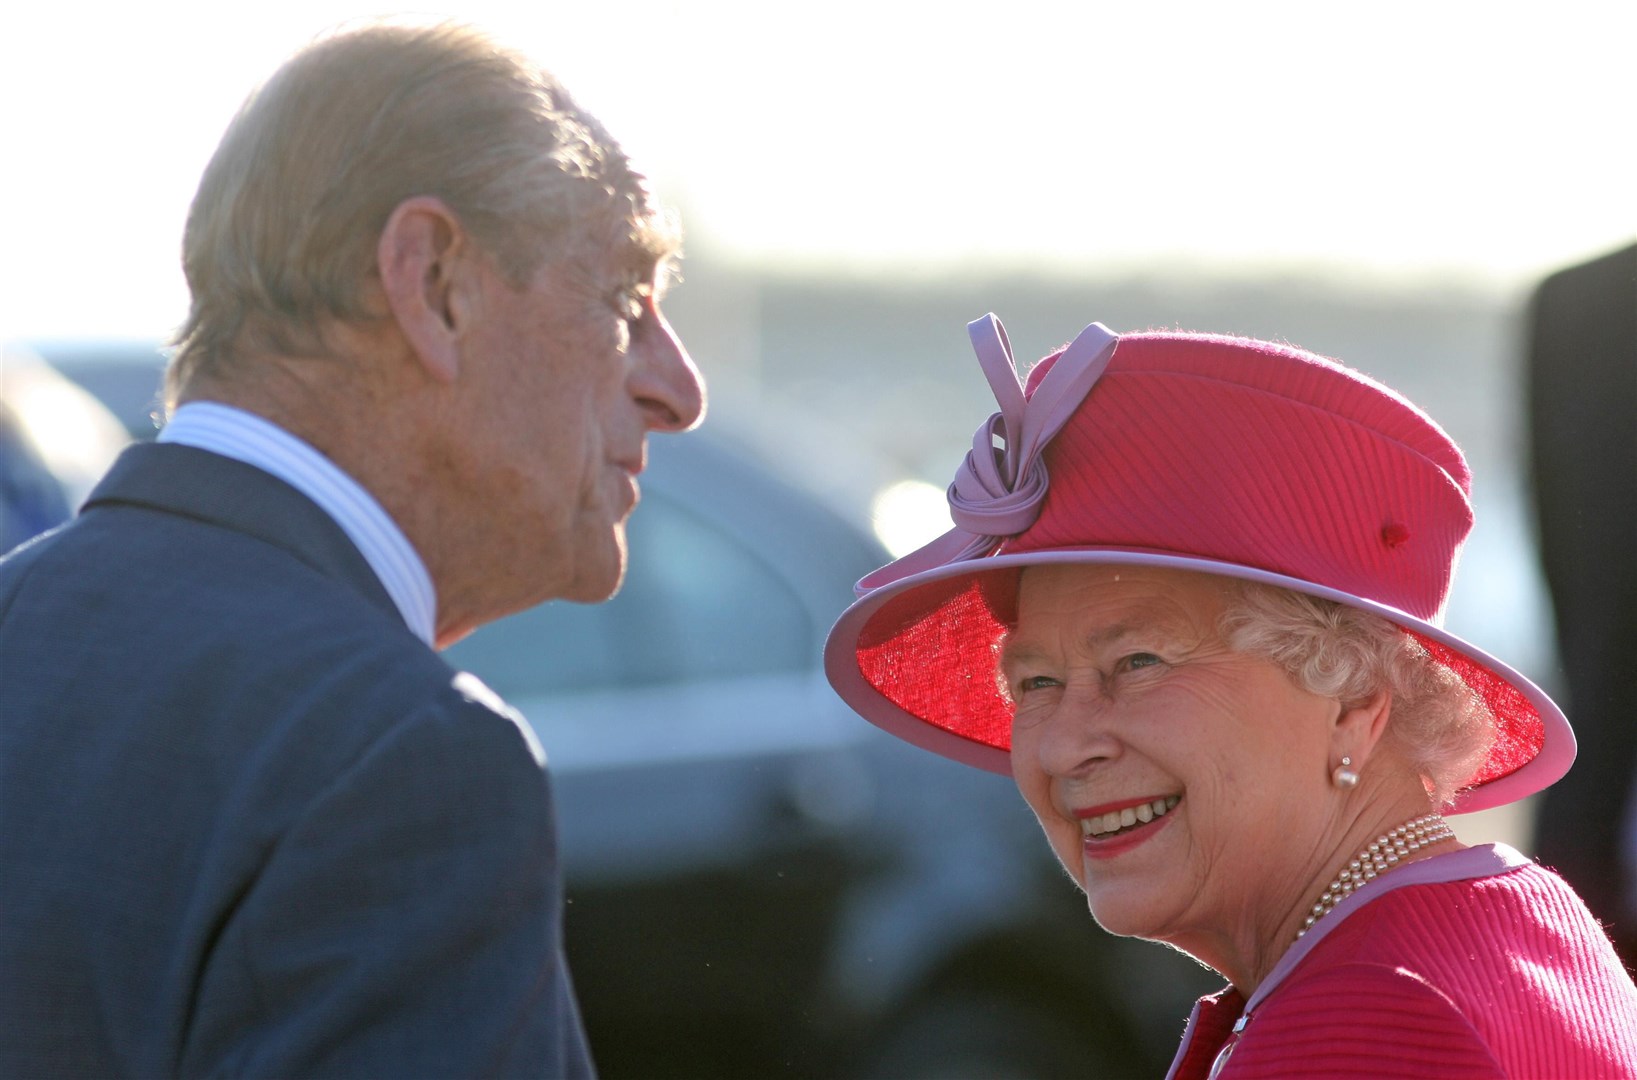 The Queen described her husband of over 70 years as her ‘constant strength and guide’ (Chris Radburn/PA)